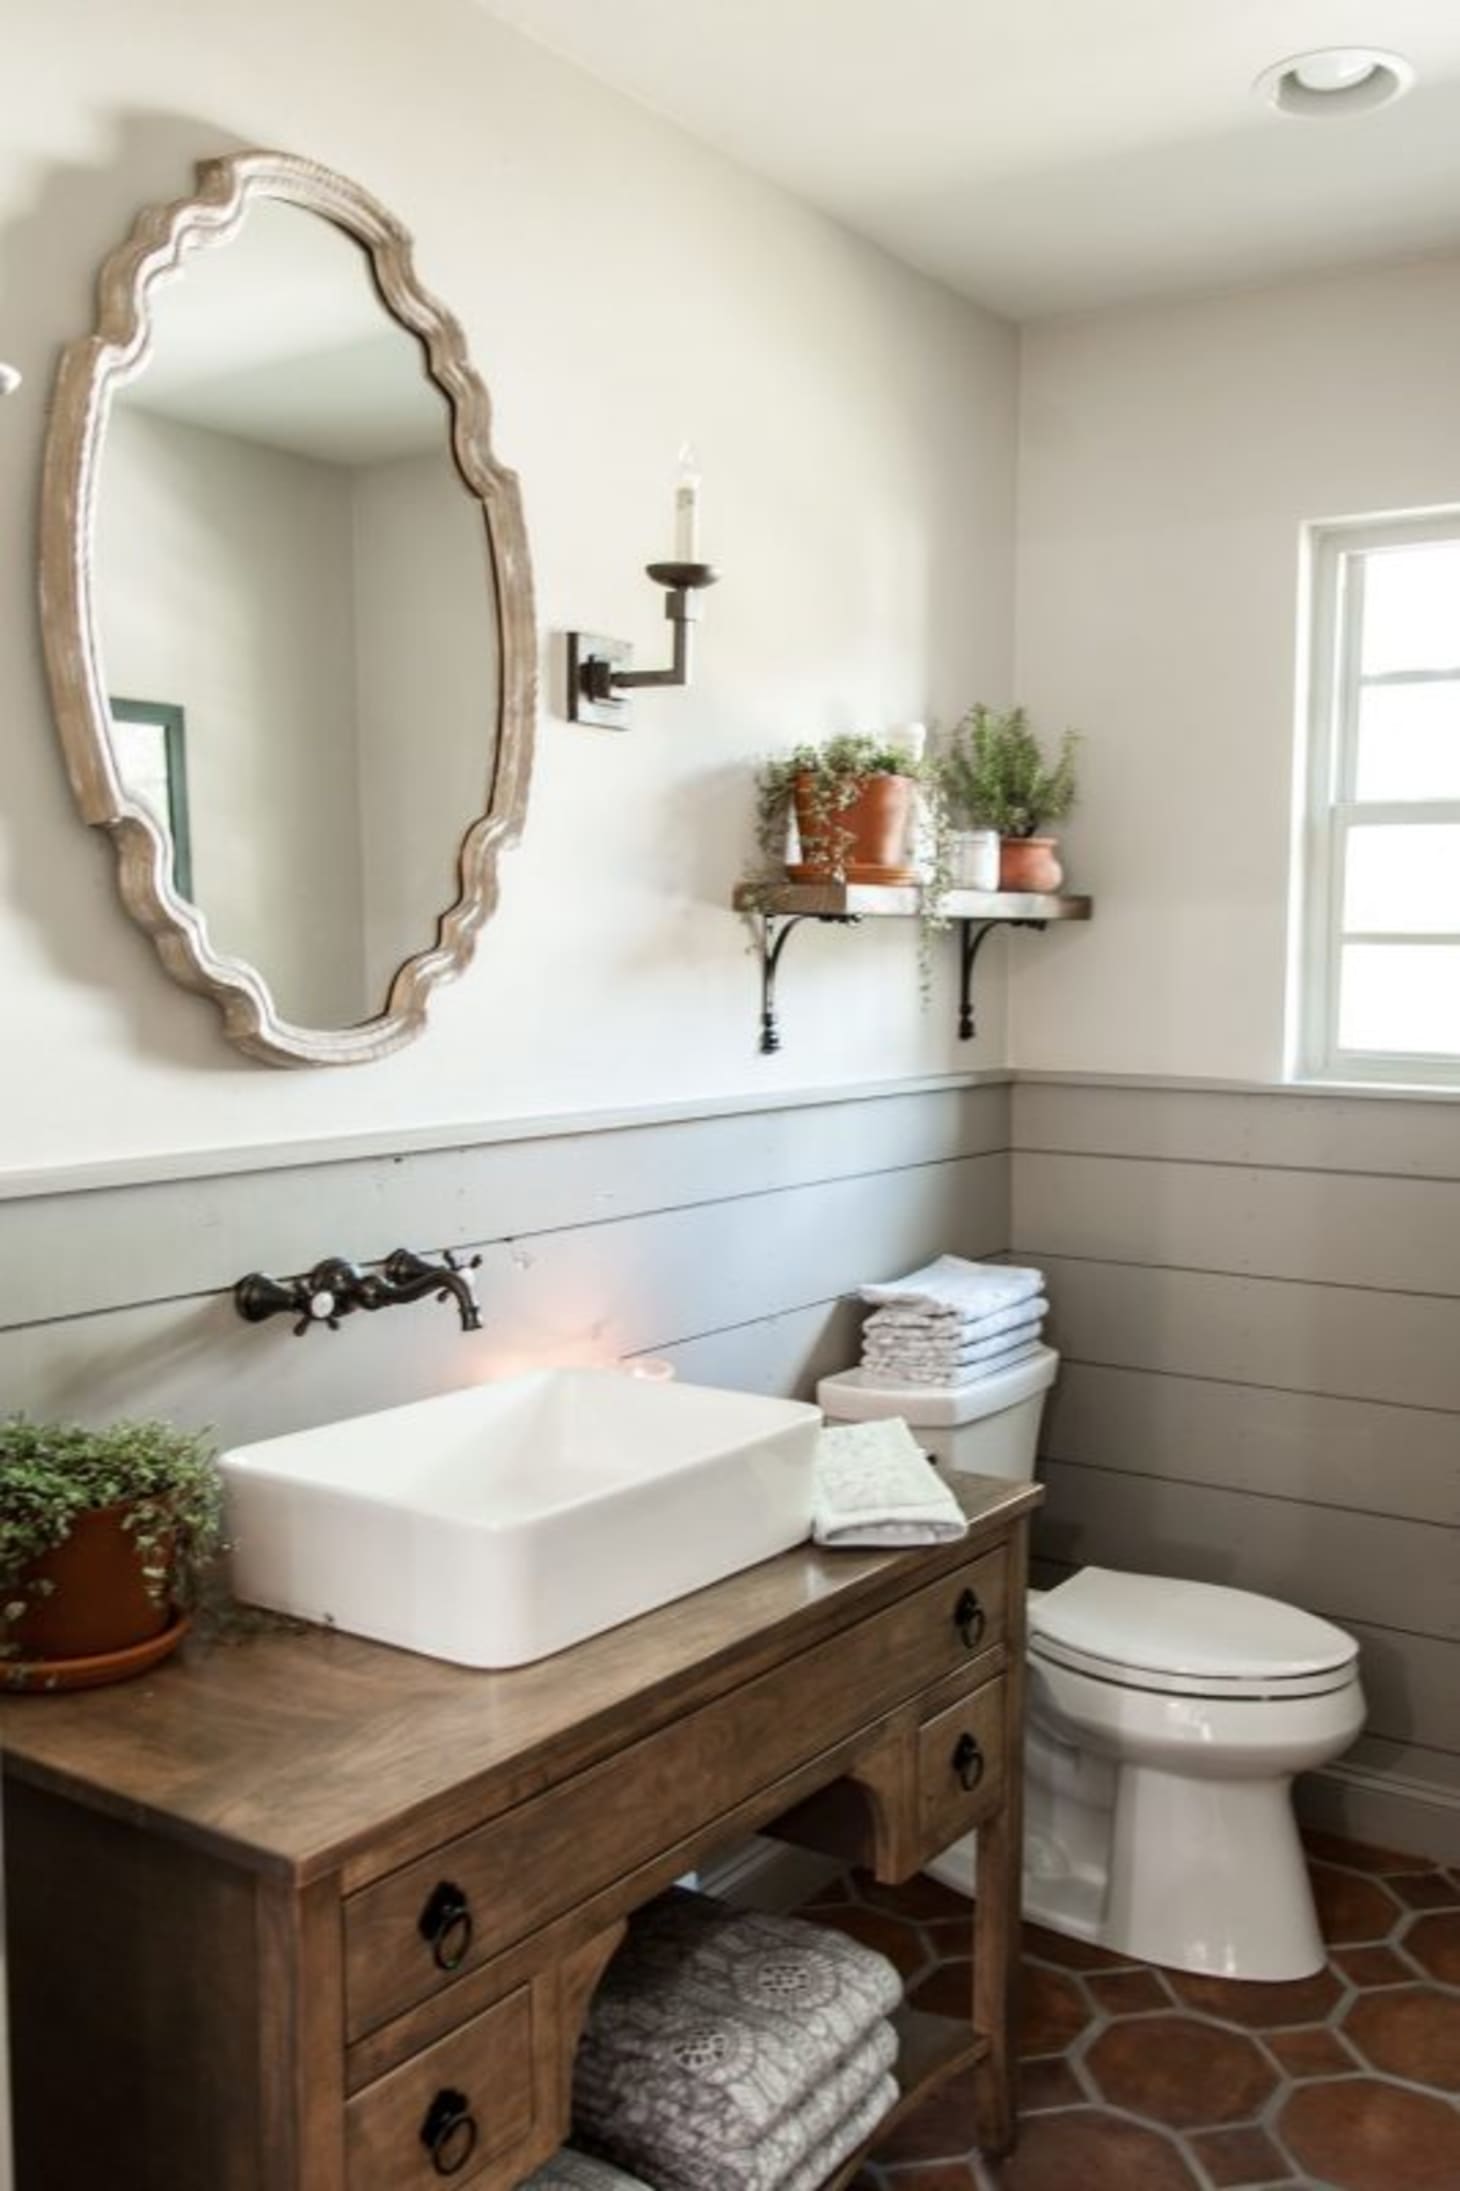 Decorating Ideas: 10 Bathrooms With Beadboard Wainscoting ...